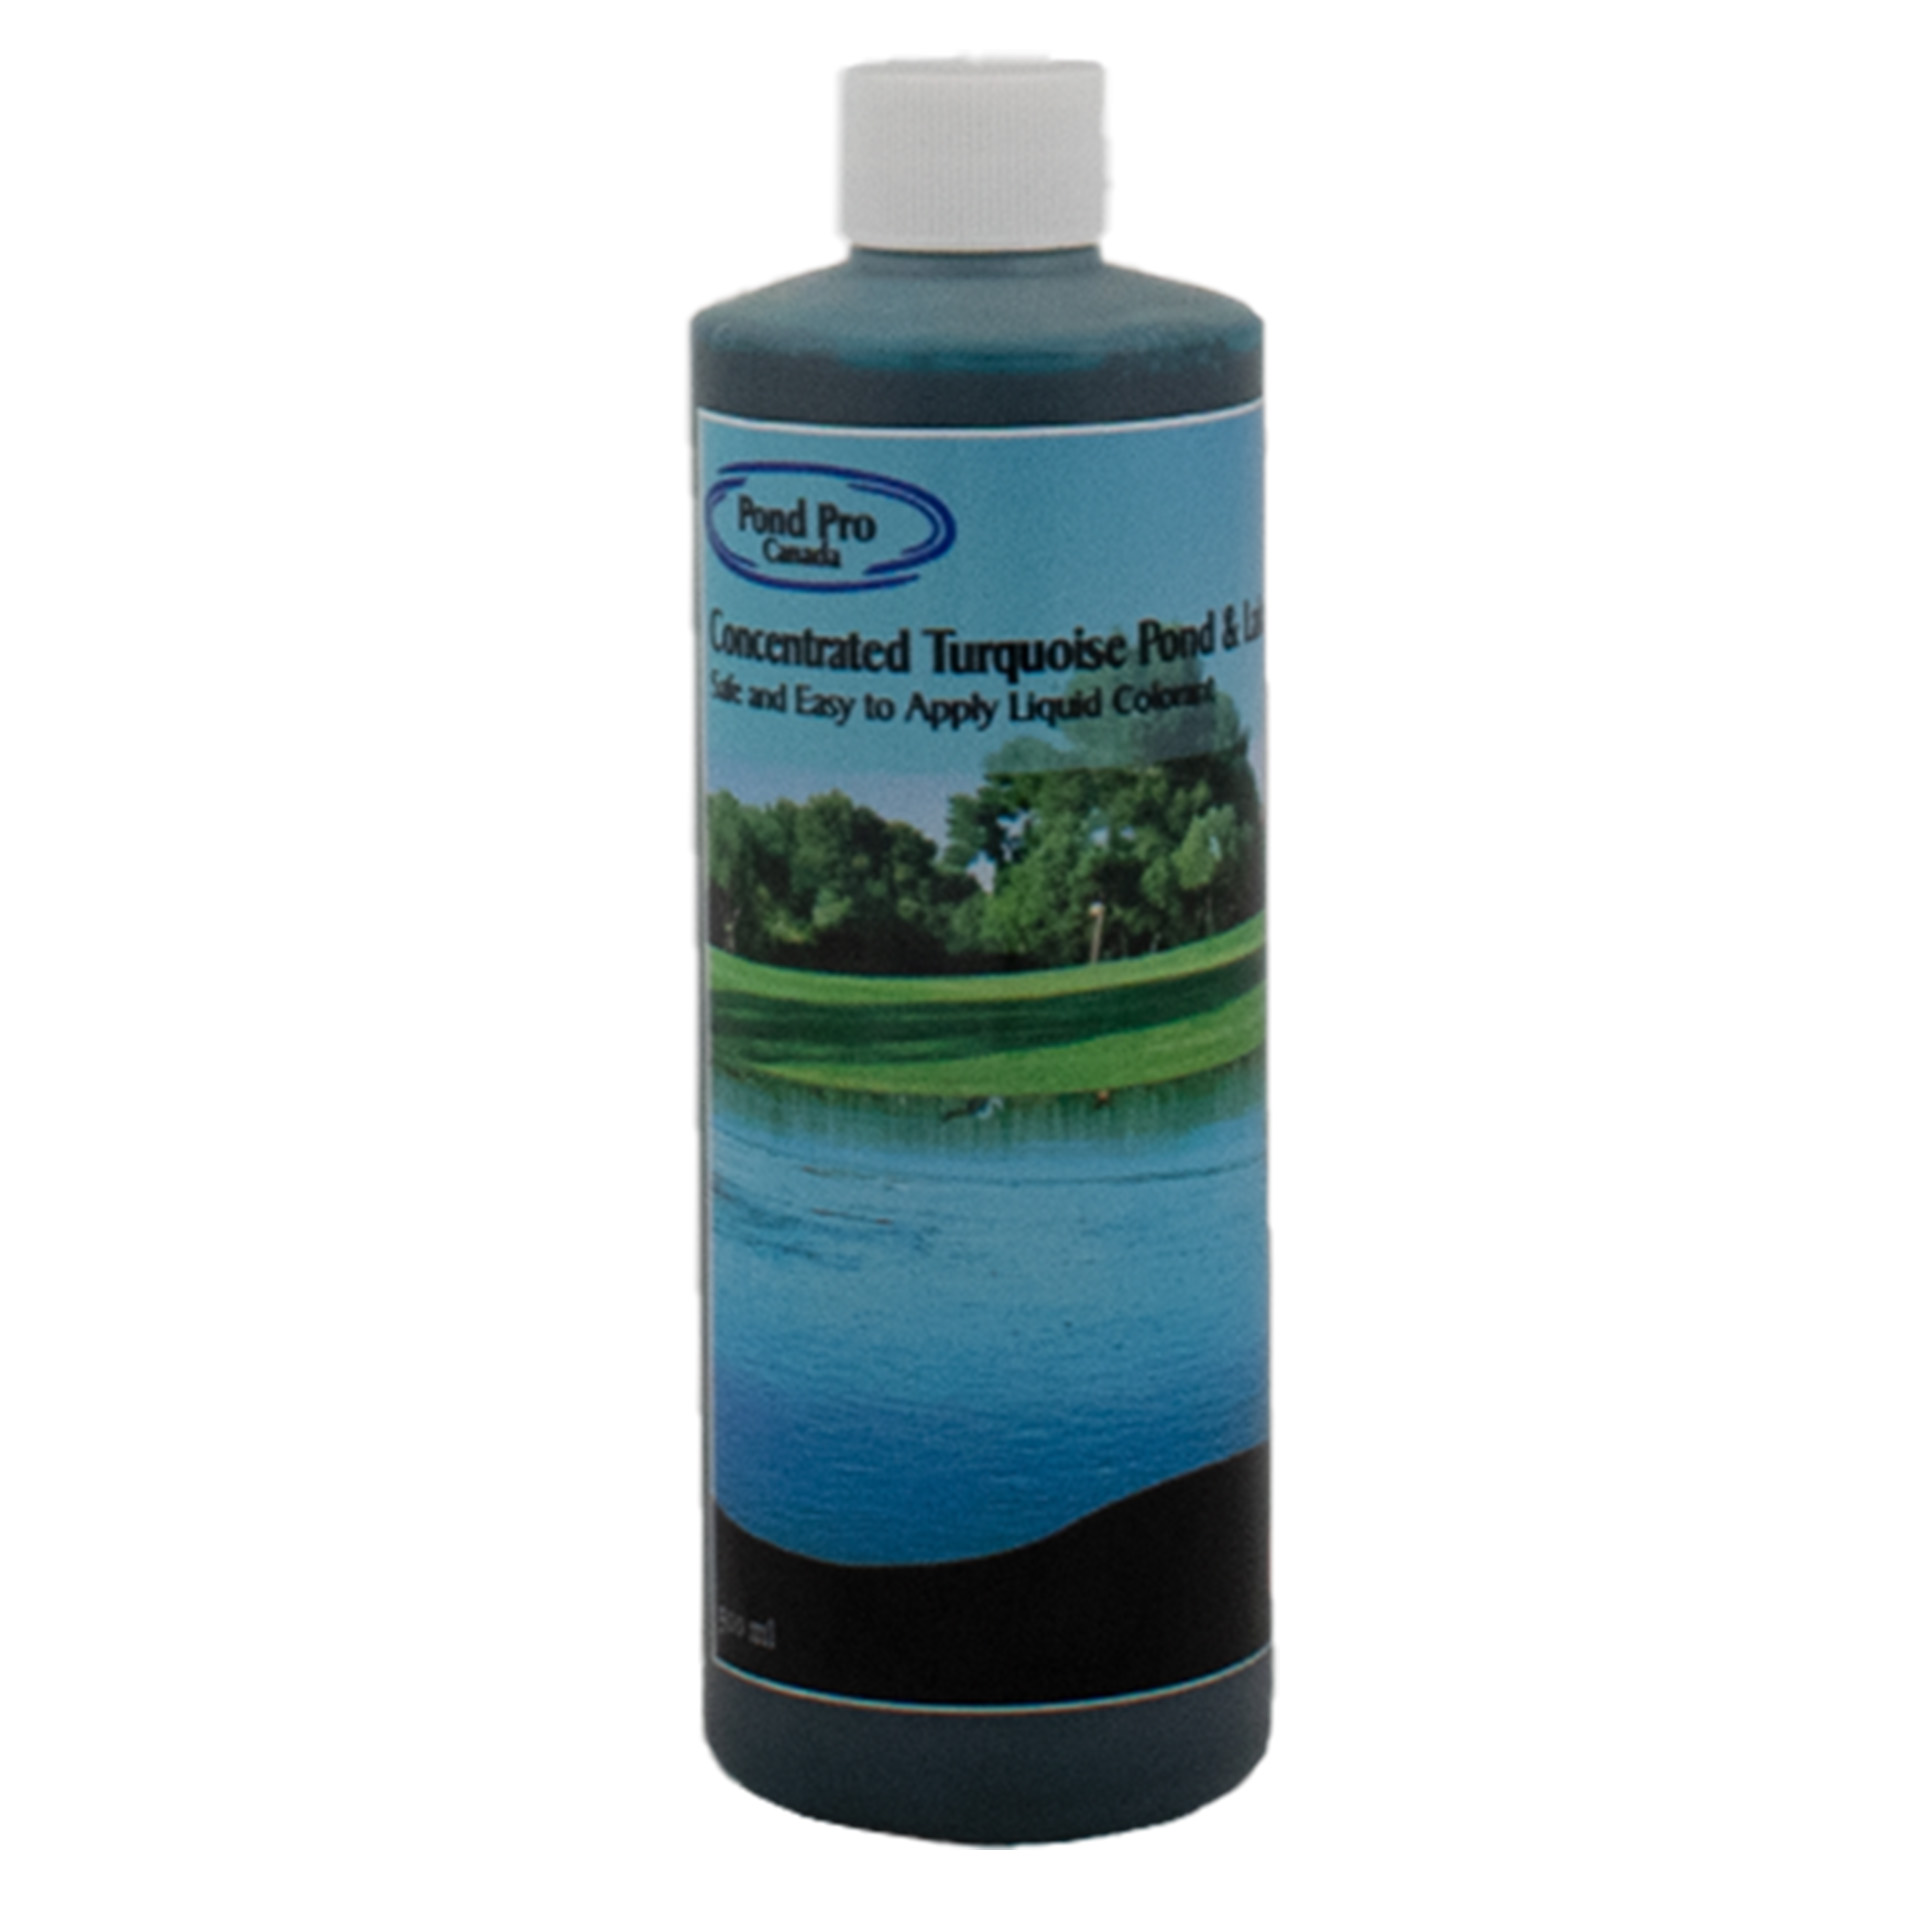 Pond Pro Concentrated Turquoise Liquid Pond & Lake Dye